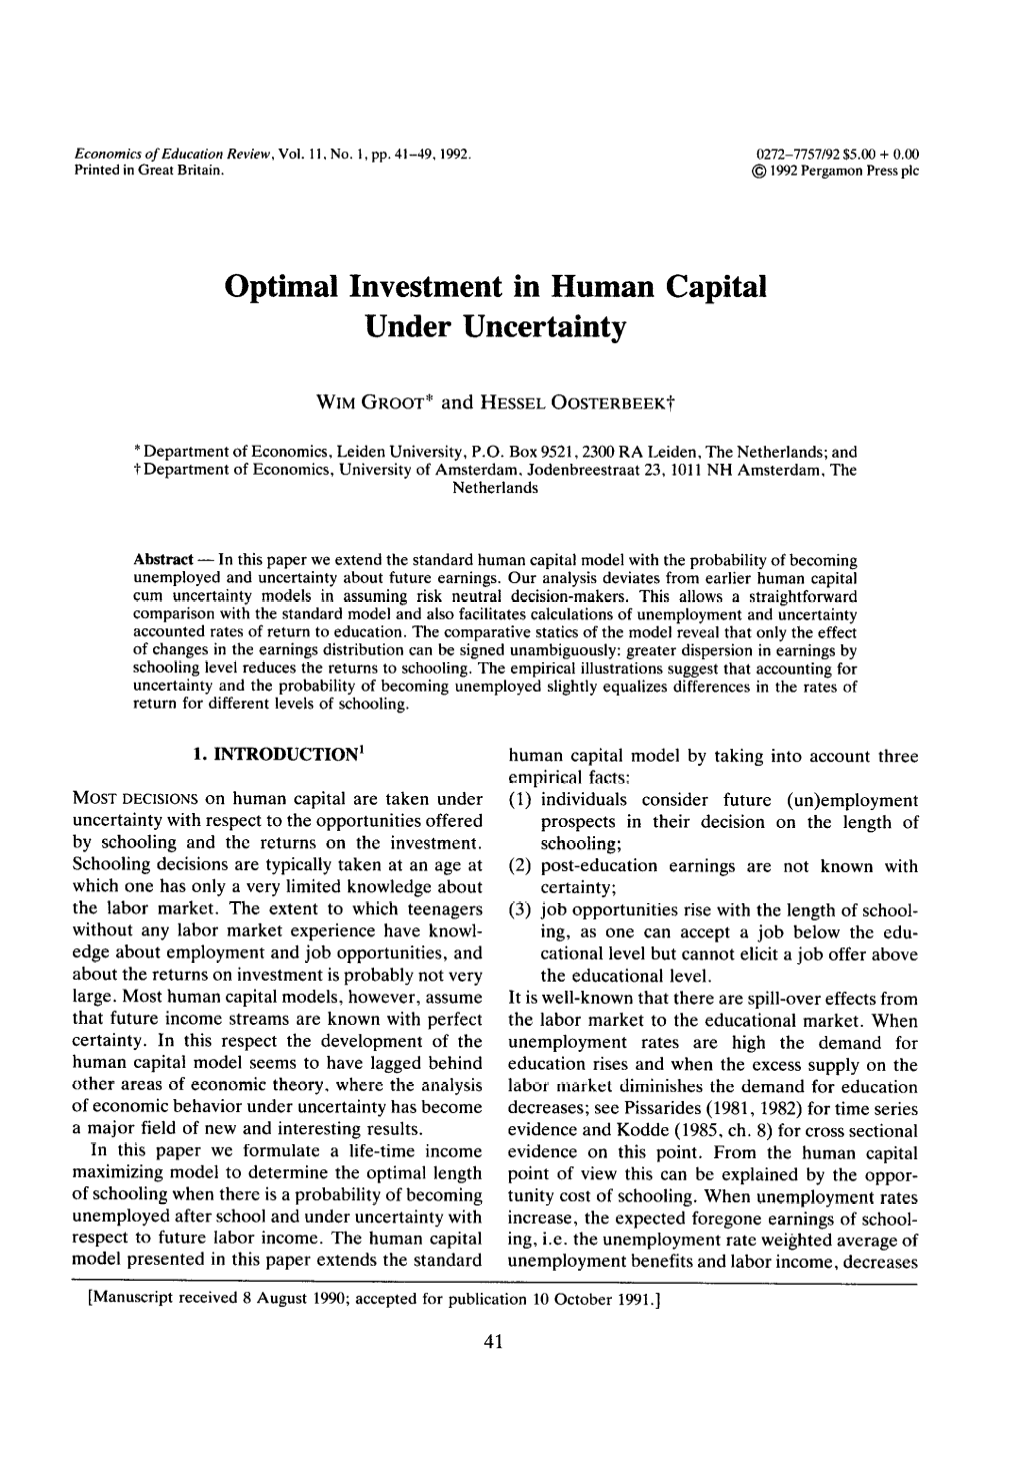 Optimal Investment in Human Capital Under Uncertainty